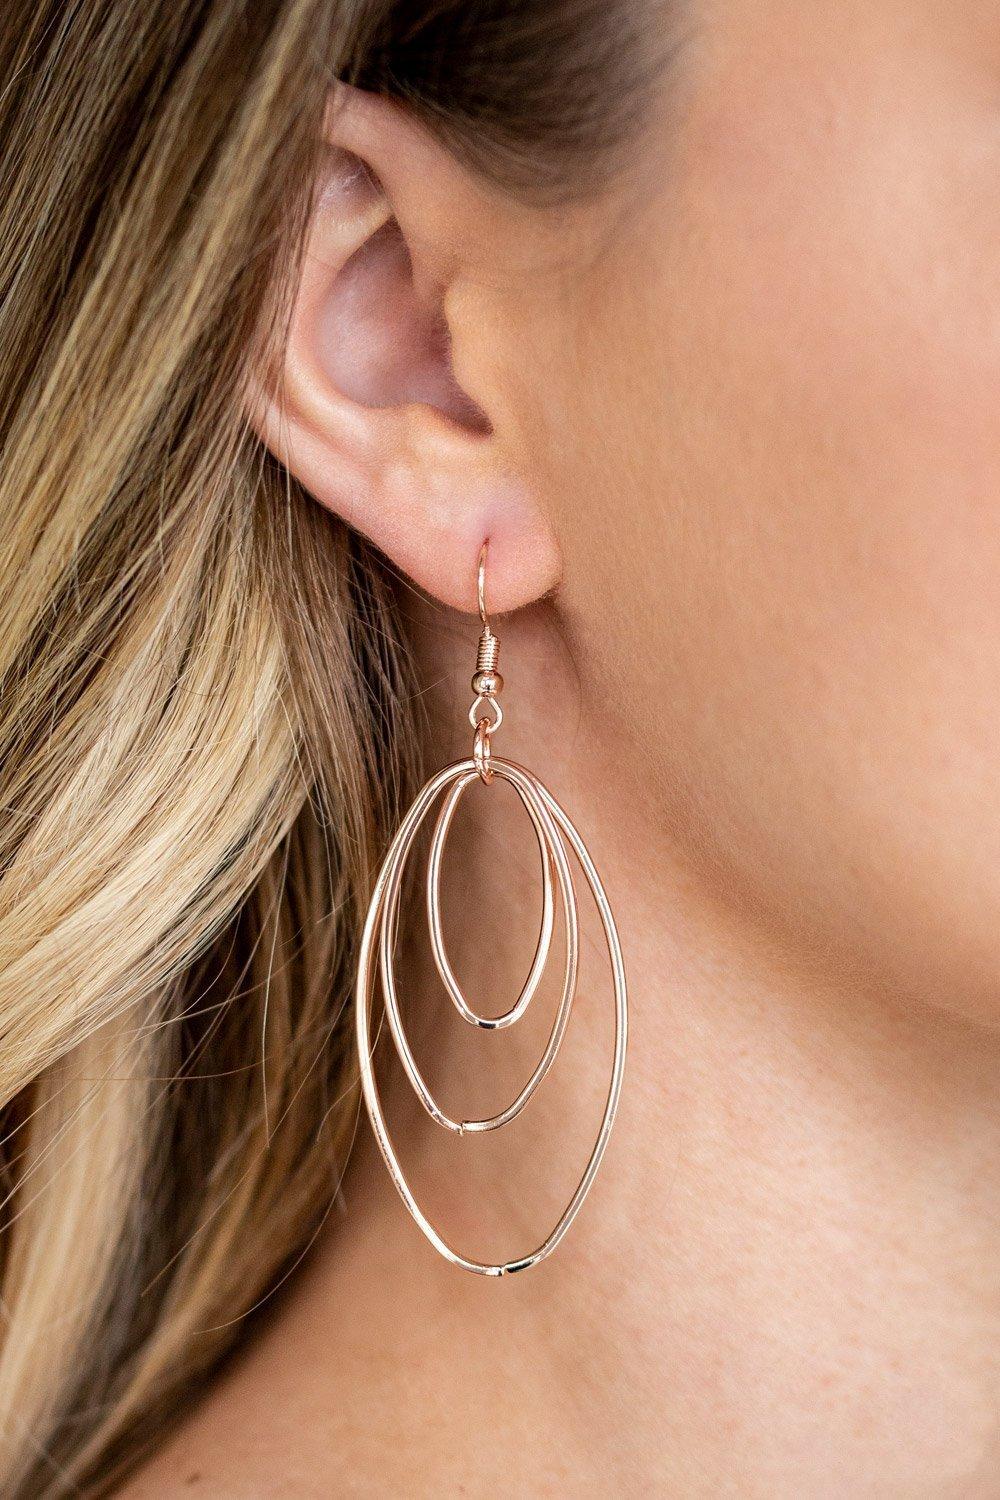 All OVAL The Place Rose Gold Earrings - Jewelry by Bretta